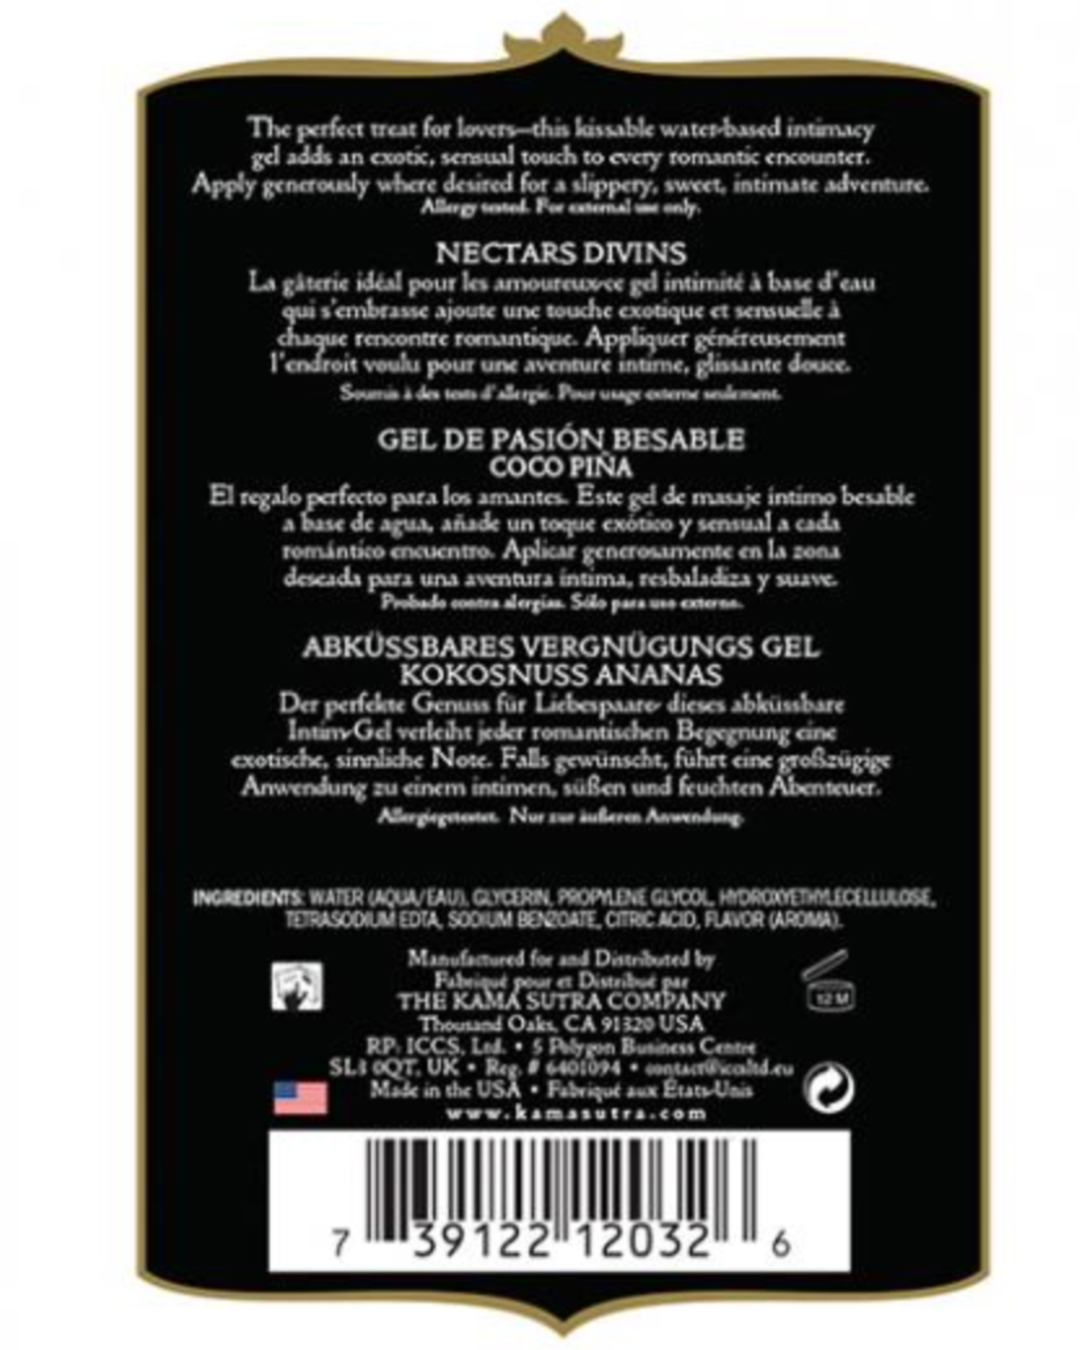 Kama Sutra Divine Nectars Coconut Pineapple Body Glide 5oz back of package